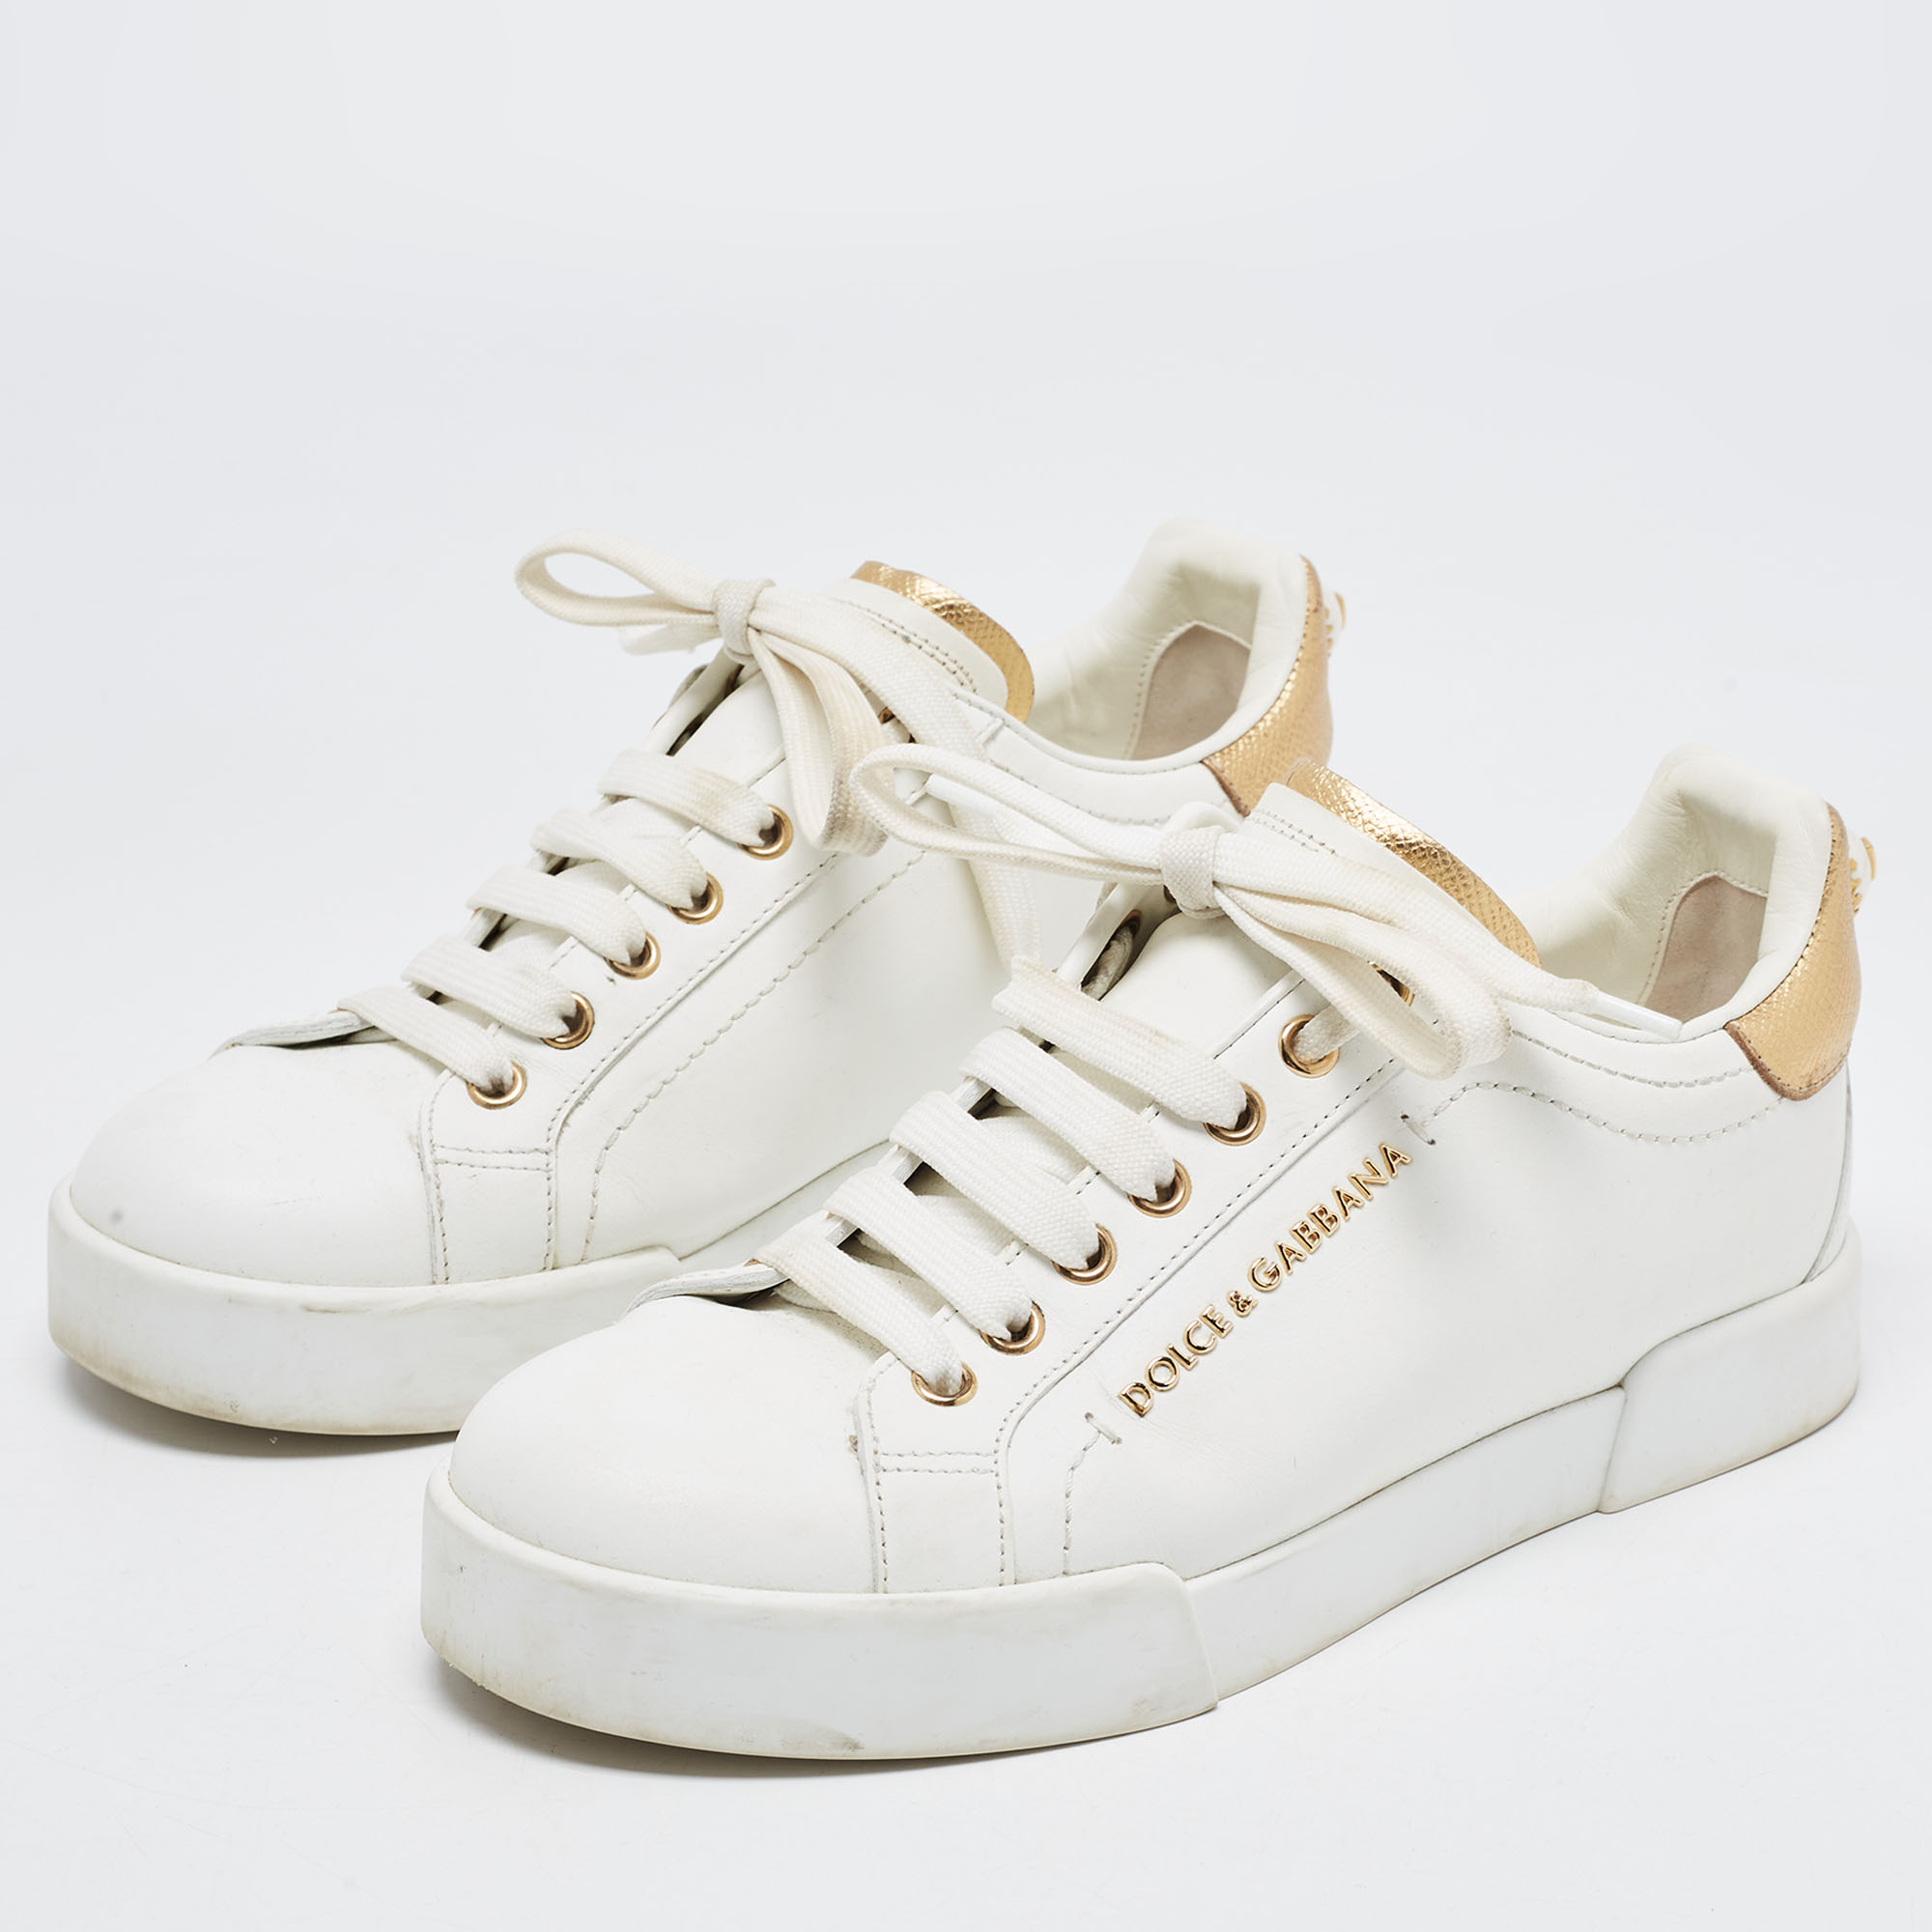 

Dolce & Gabbana White/Gold Leather Pearl Embellished Portofino Sneakers Size